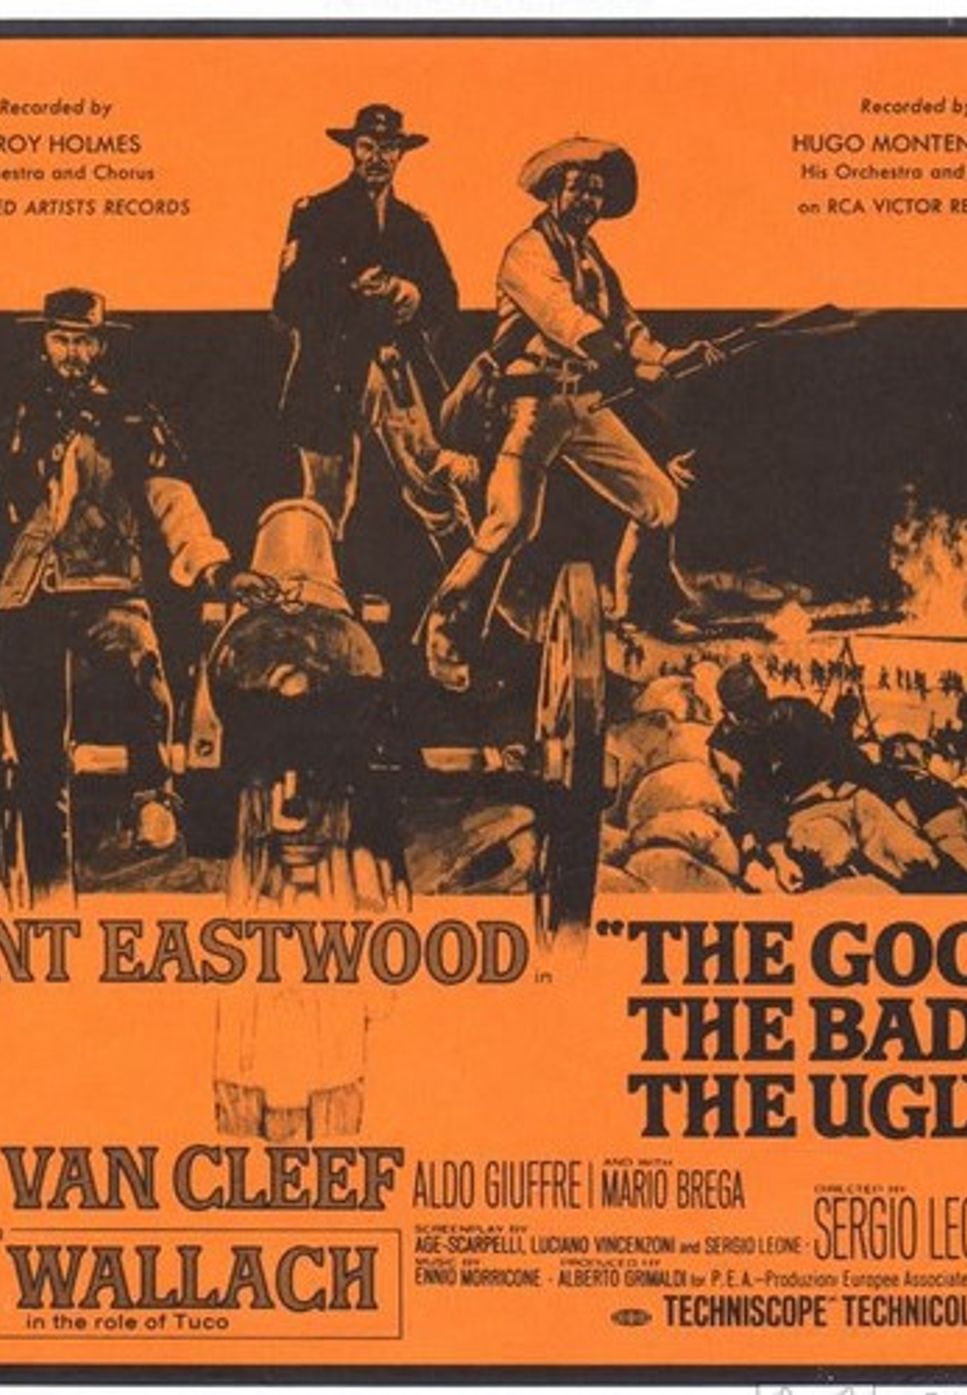 Ennio Morricone - The Ecstasy of Gold (《The Good, the  Bad the Ugly》BGM - For Piano Solo) by poon